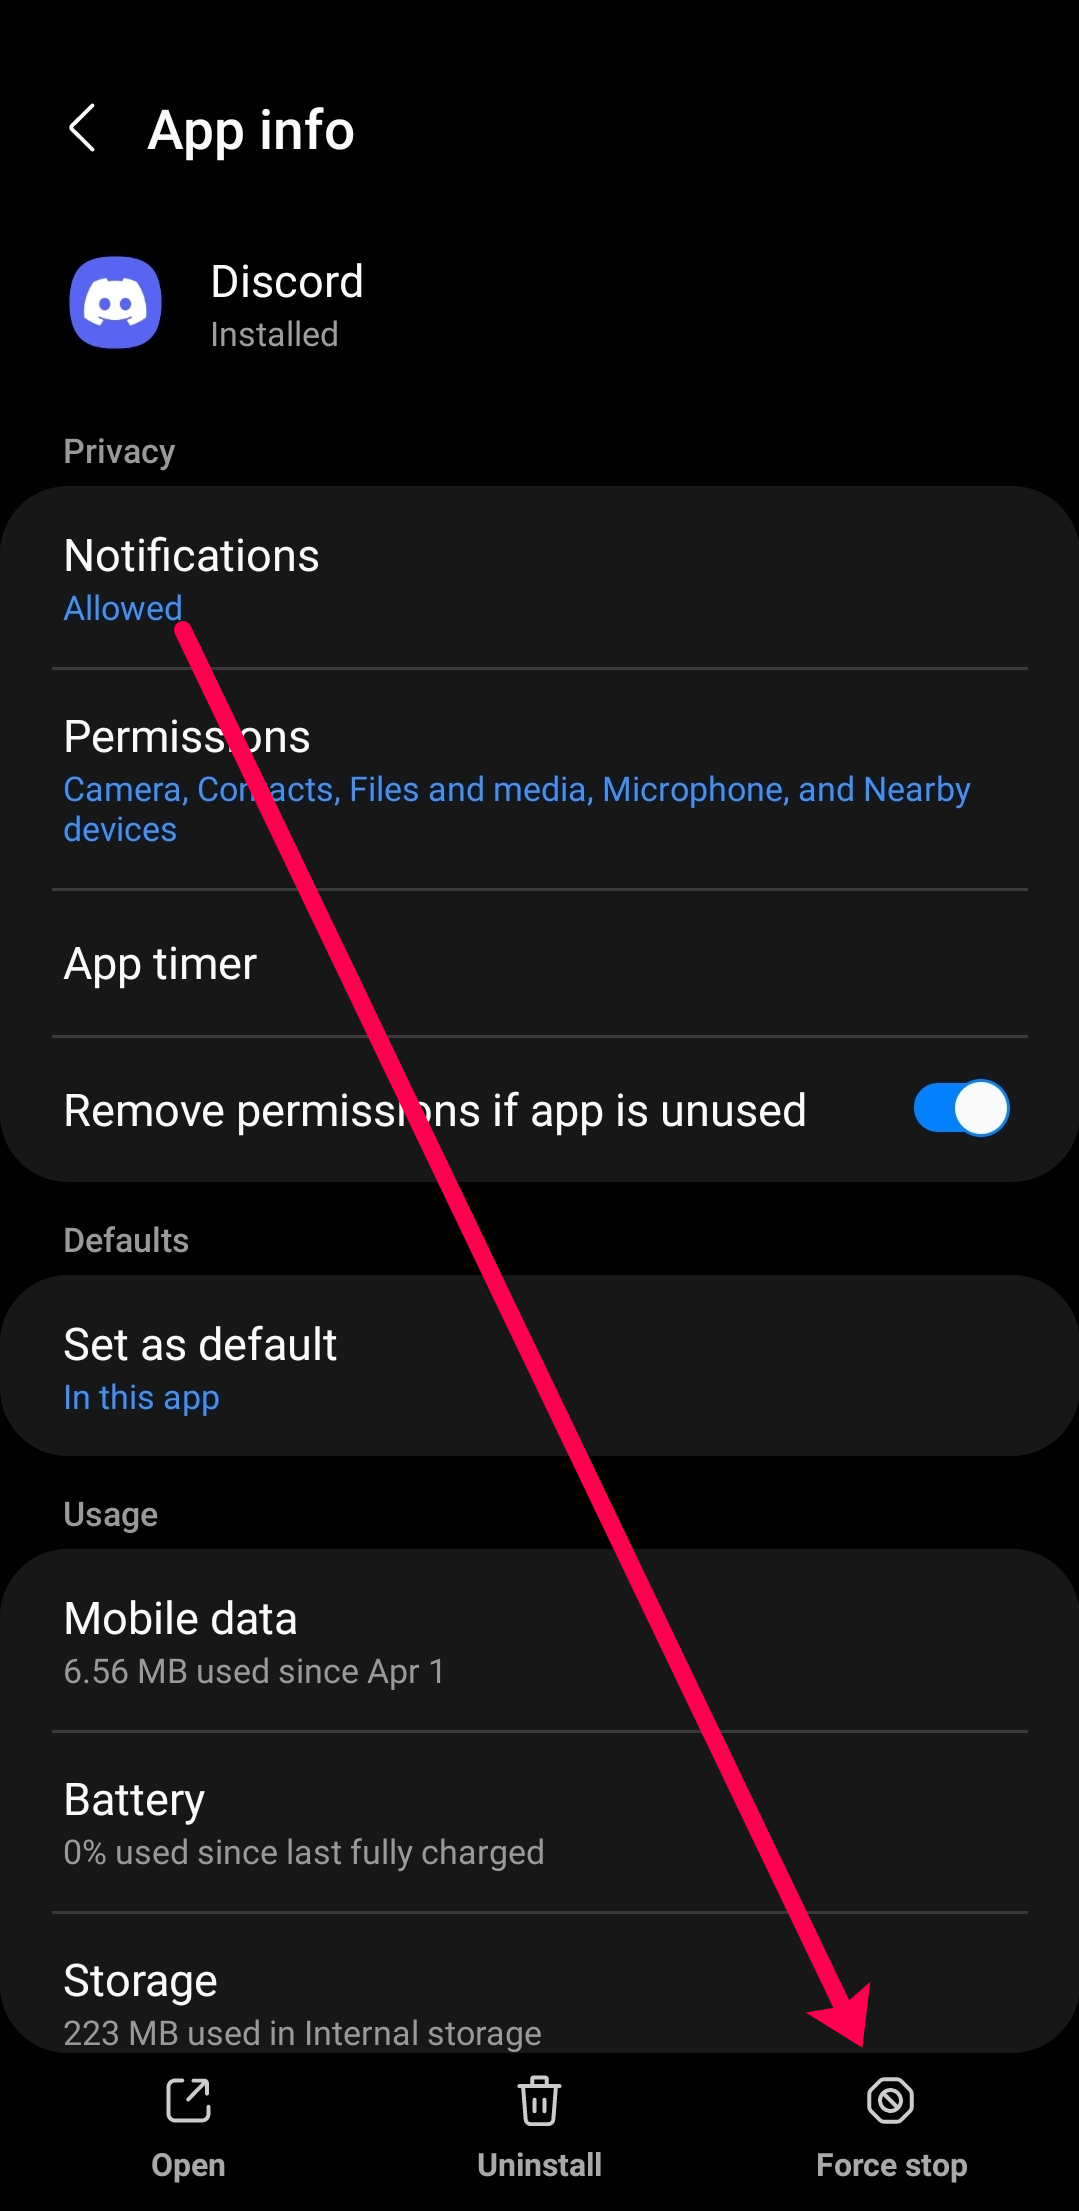 Restart Discord and your device to see if that resolves the issue.
Update your audio drivers to ensure they are up-to-date and compatible with Discord.